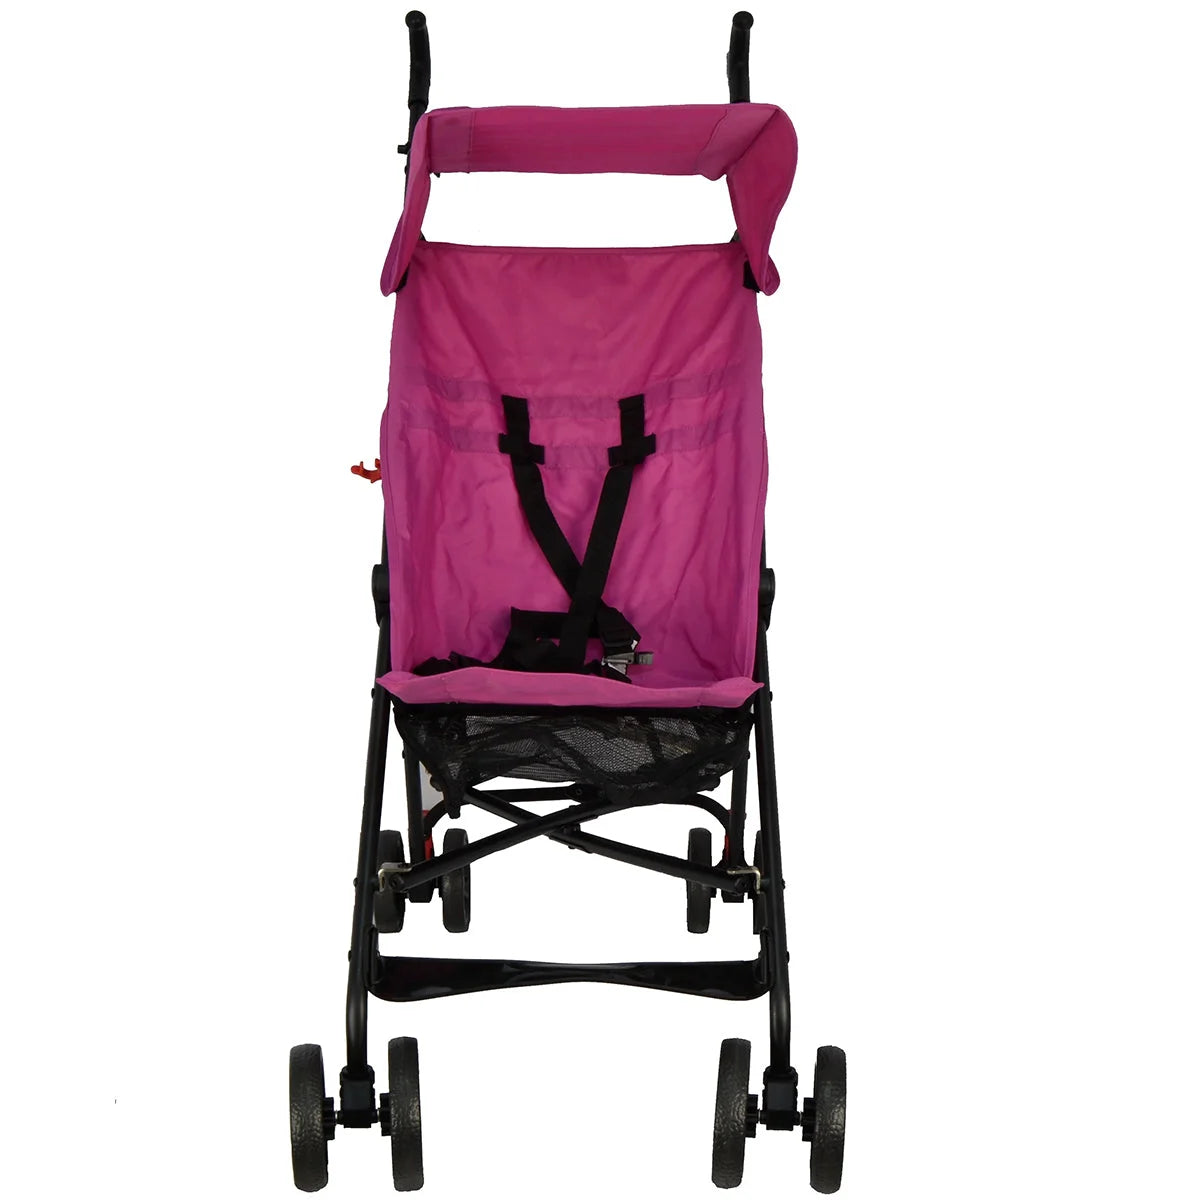 Baby's Club Umbrella Stroller With Canopy (Pink)